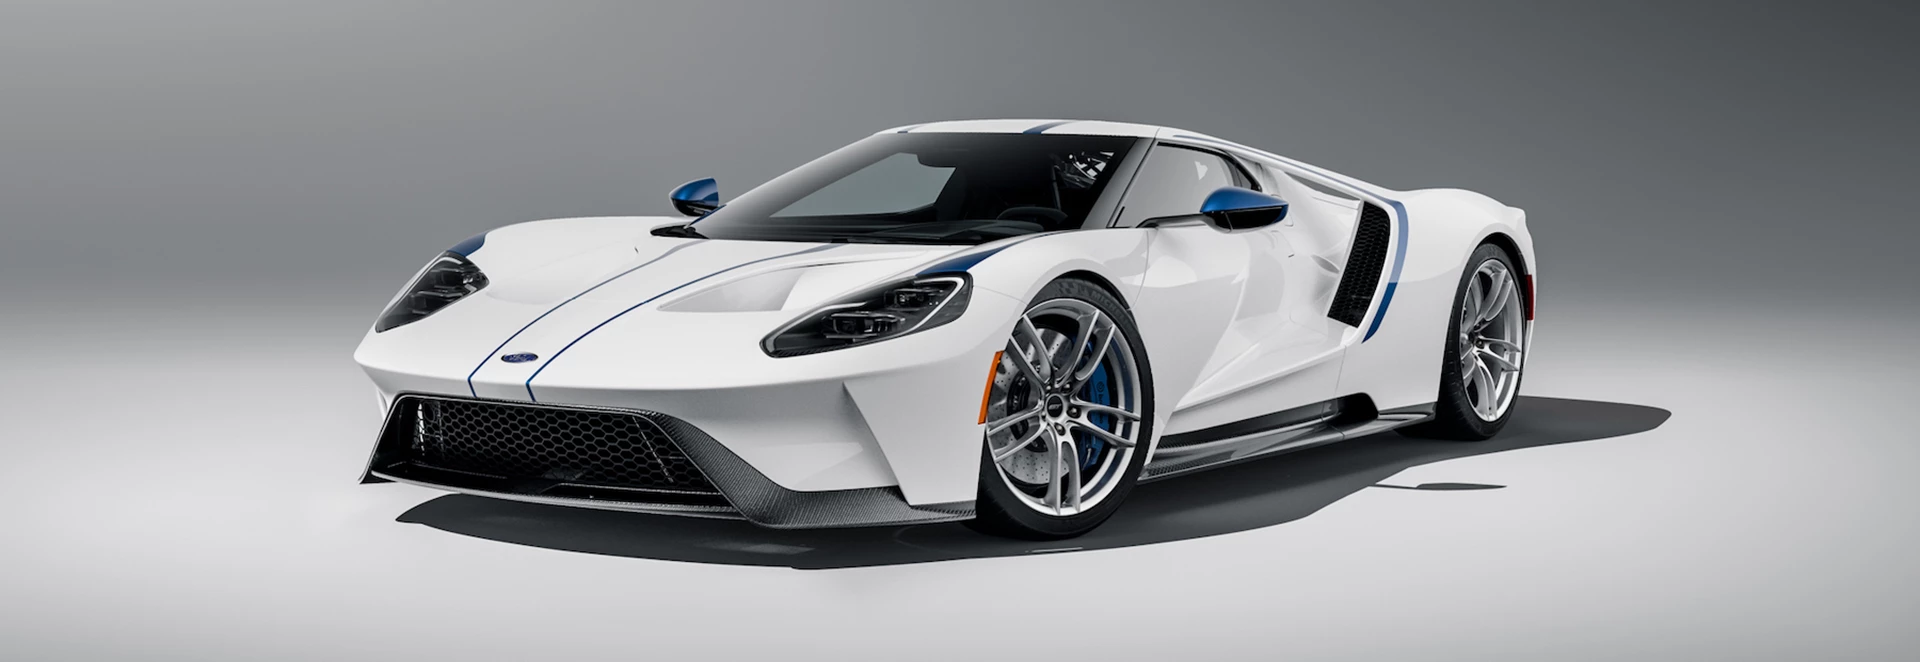 New Ford GT Heritage Edition supercar unveiled 